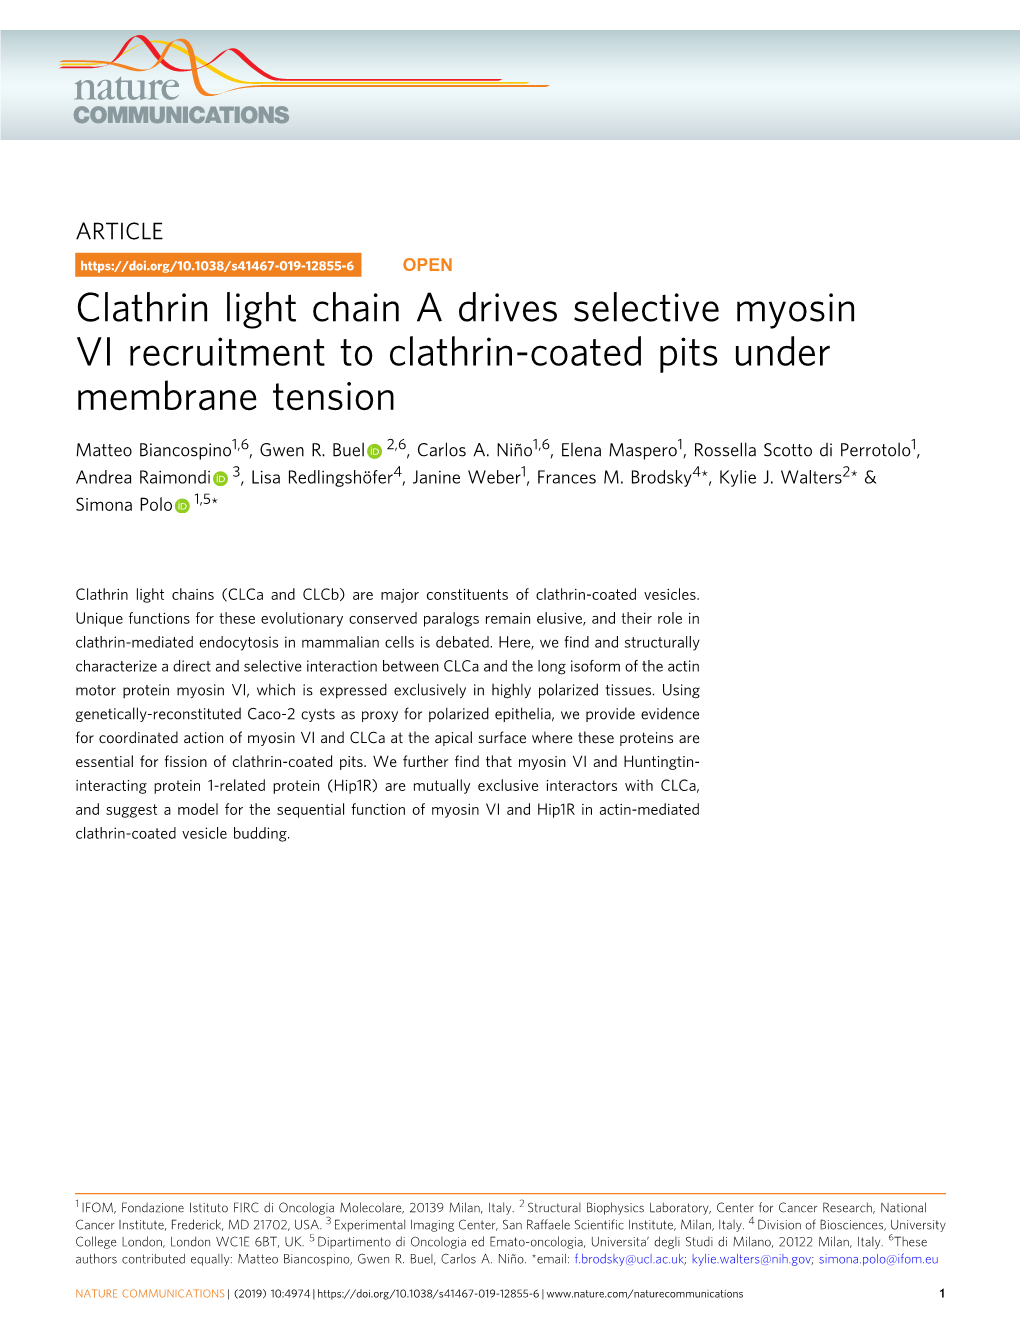 Clathrin Light Chain a Drives Selective Myosin VI Recruitment to Clathrin-Coated Pits Under Membrane Tension